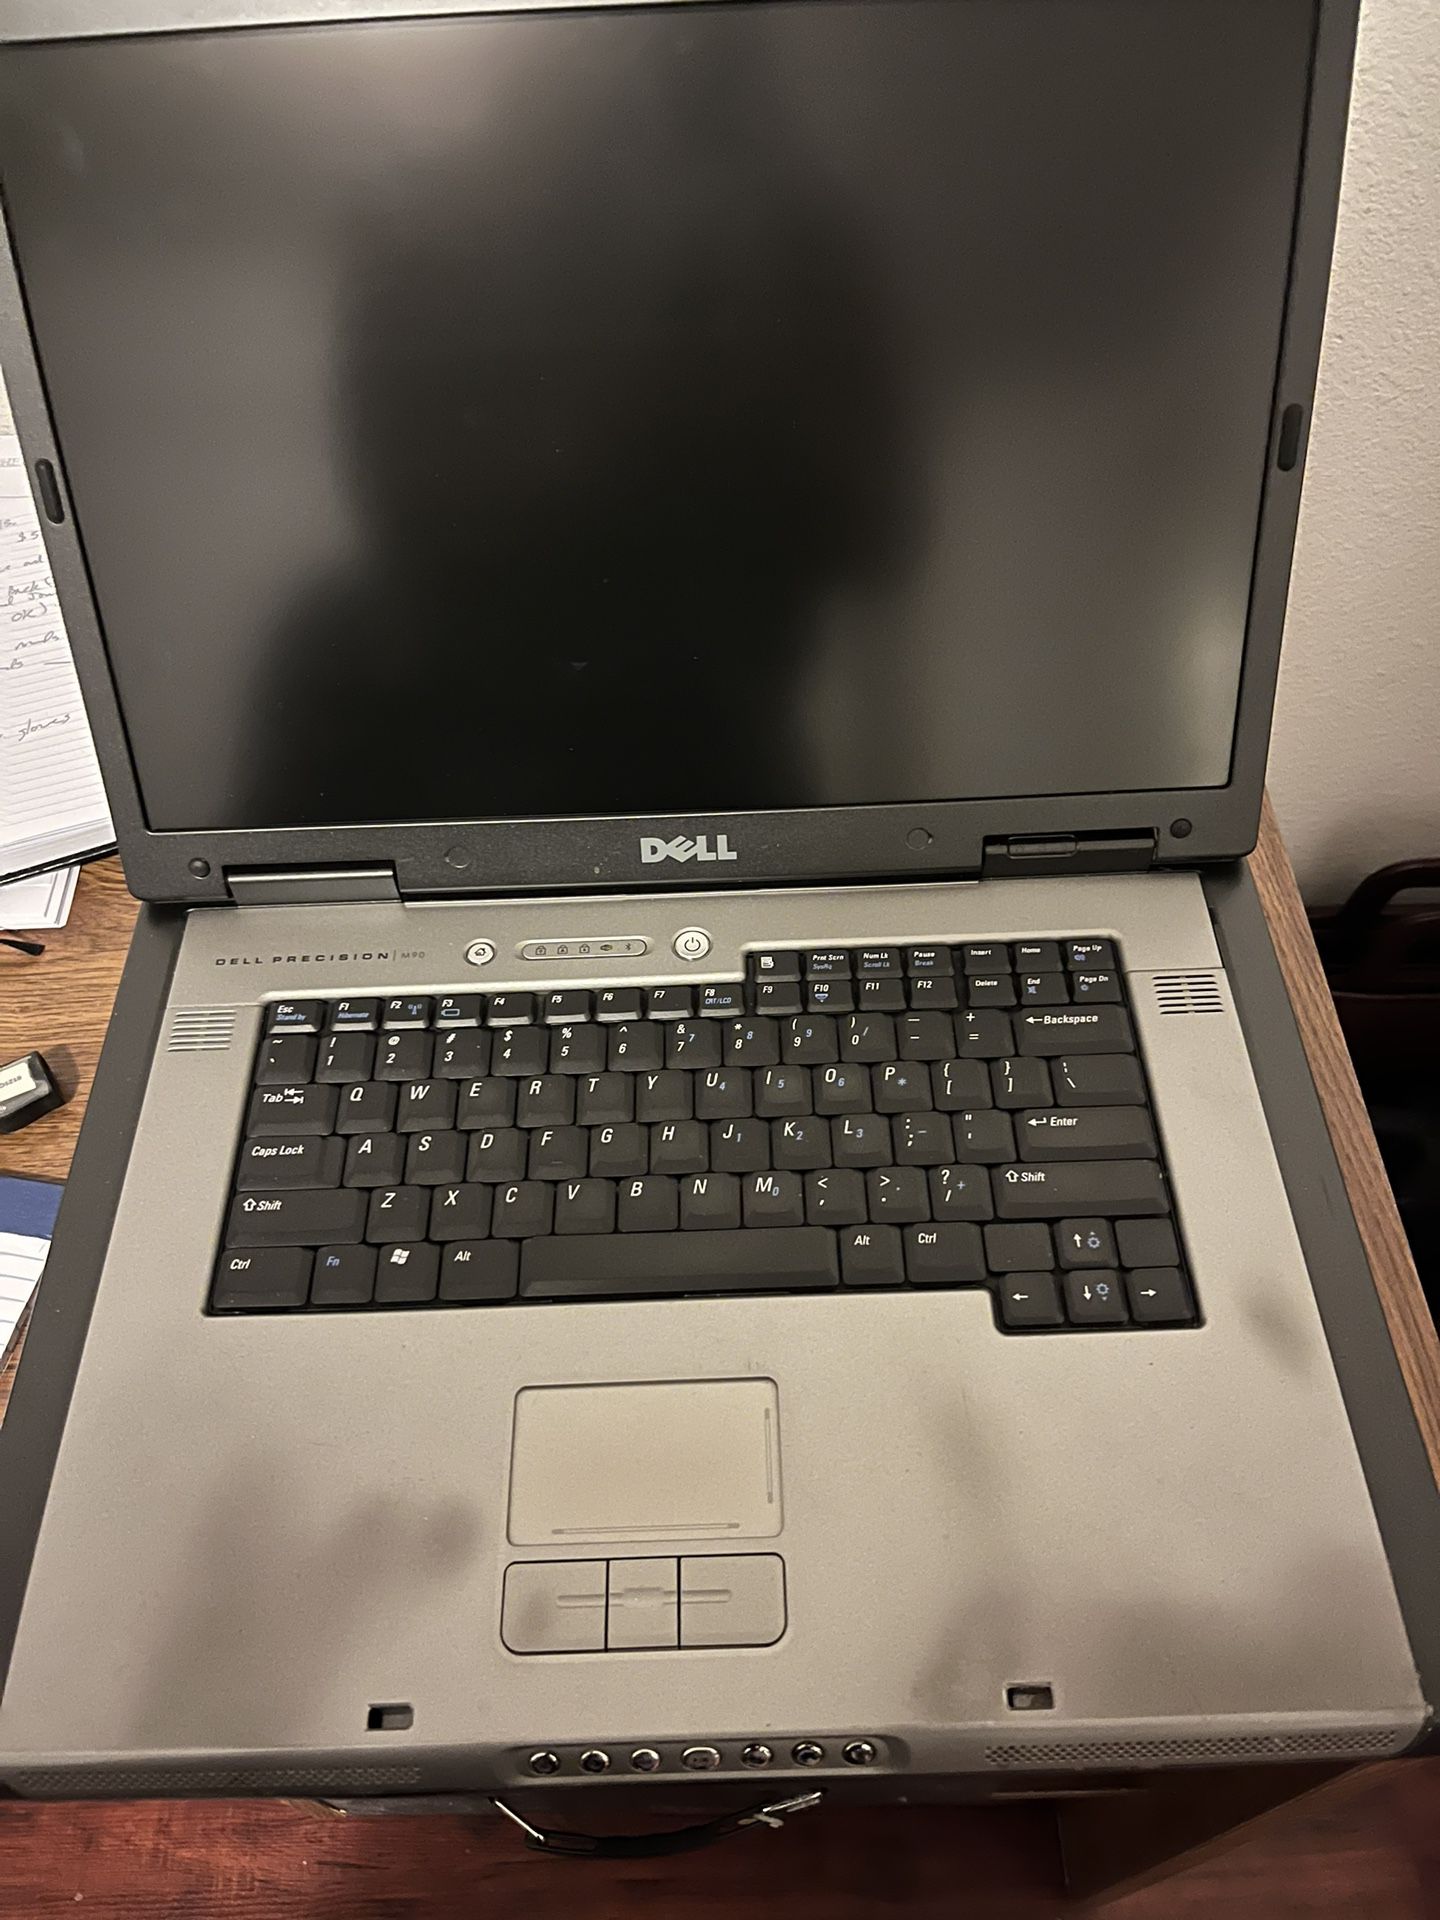 DELL Laptop Computer Old School